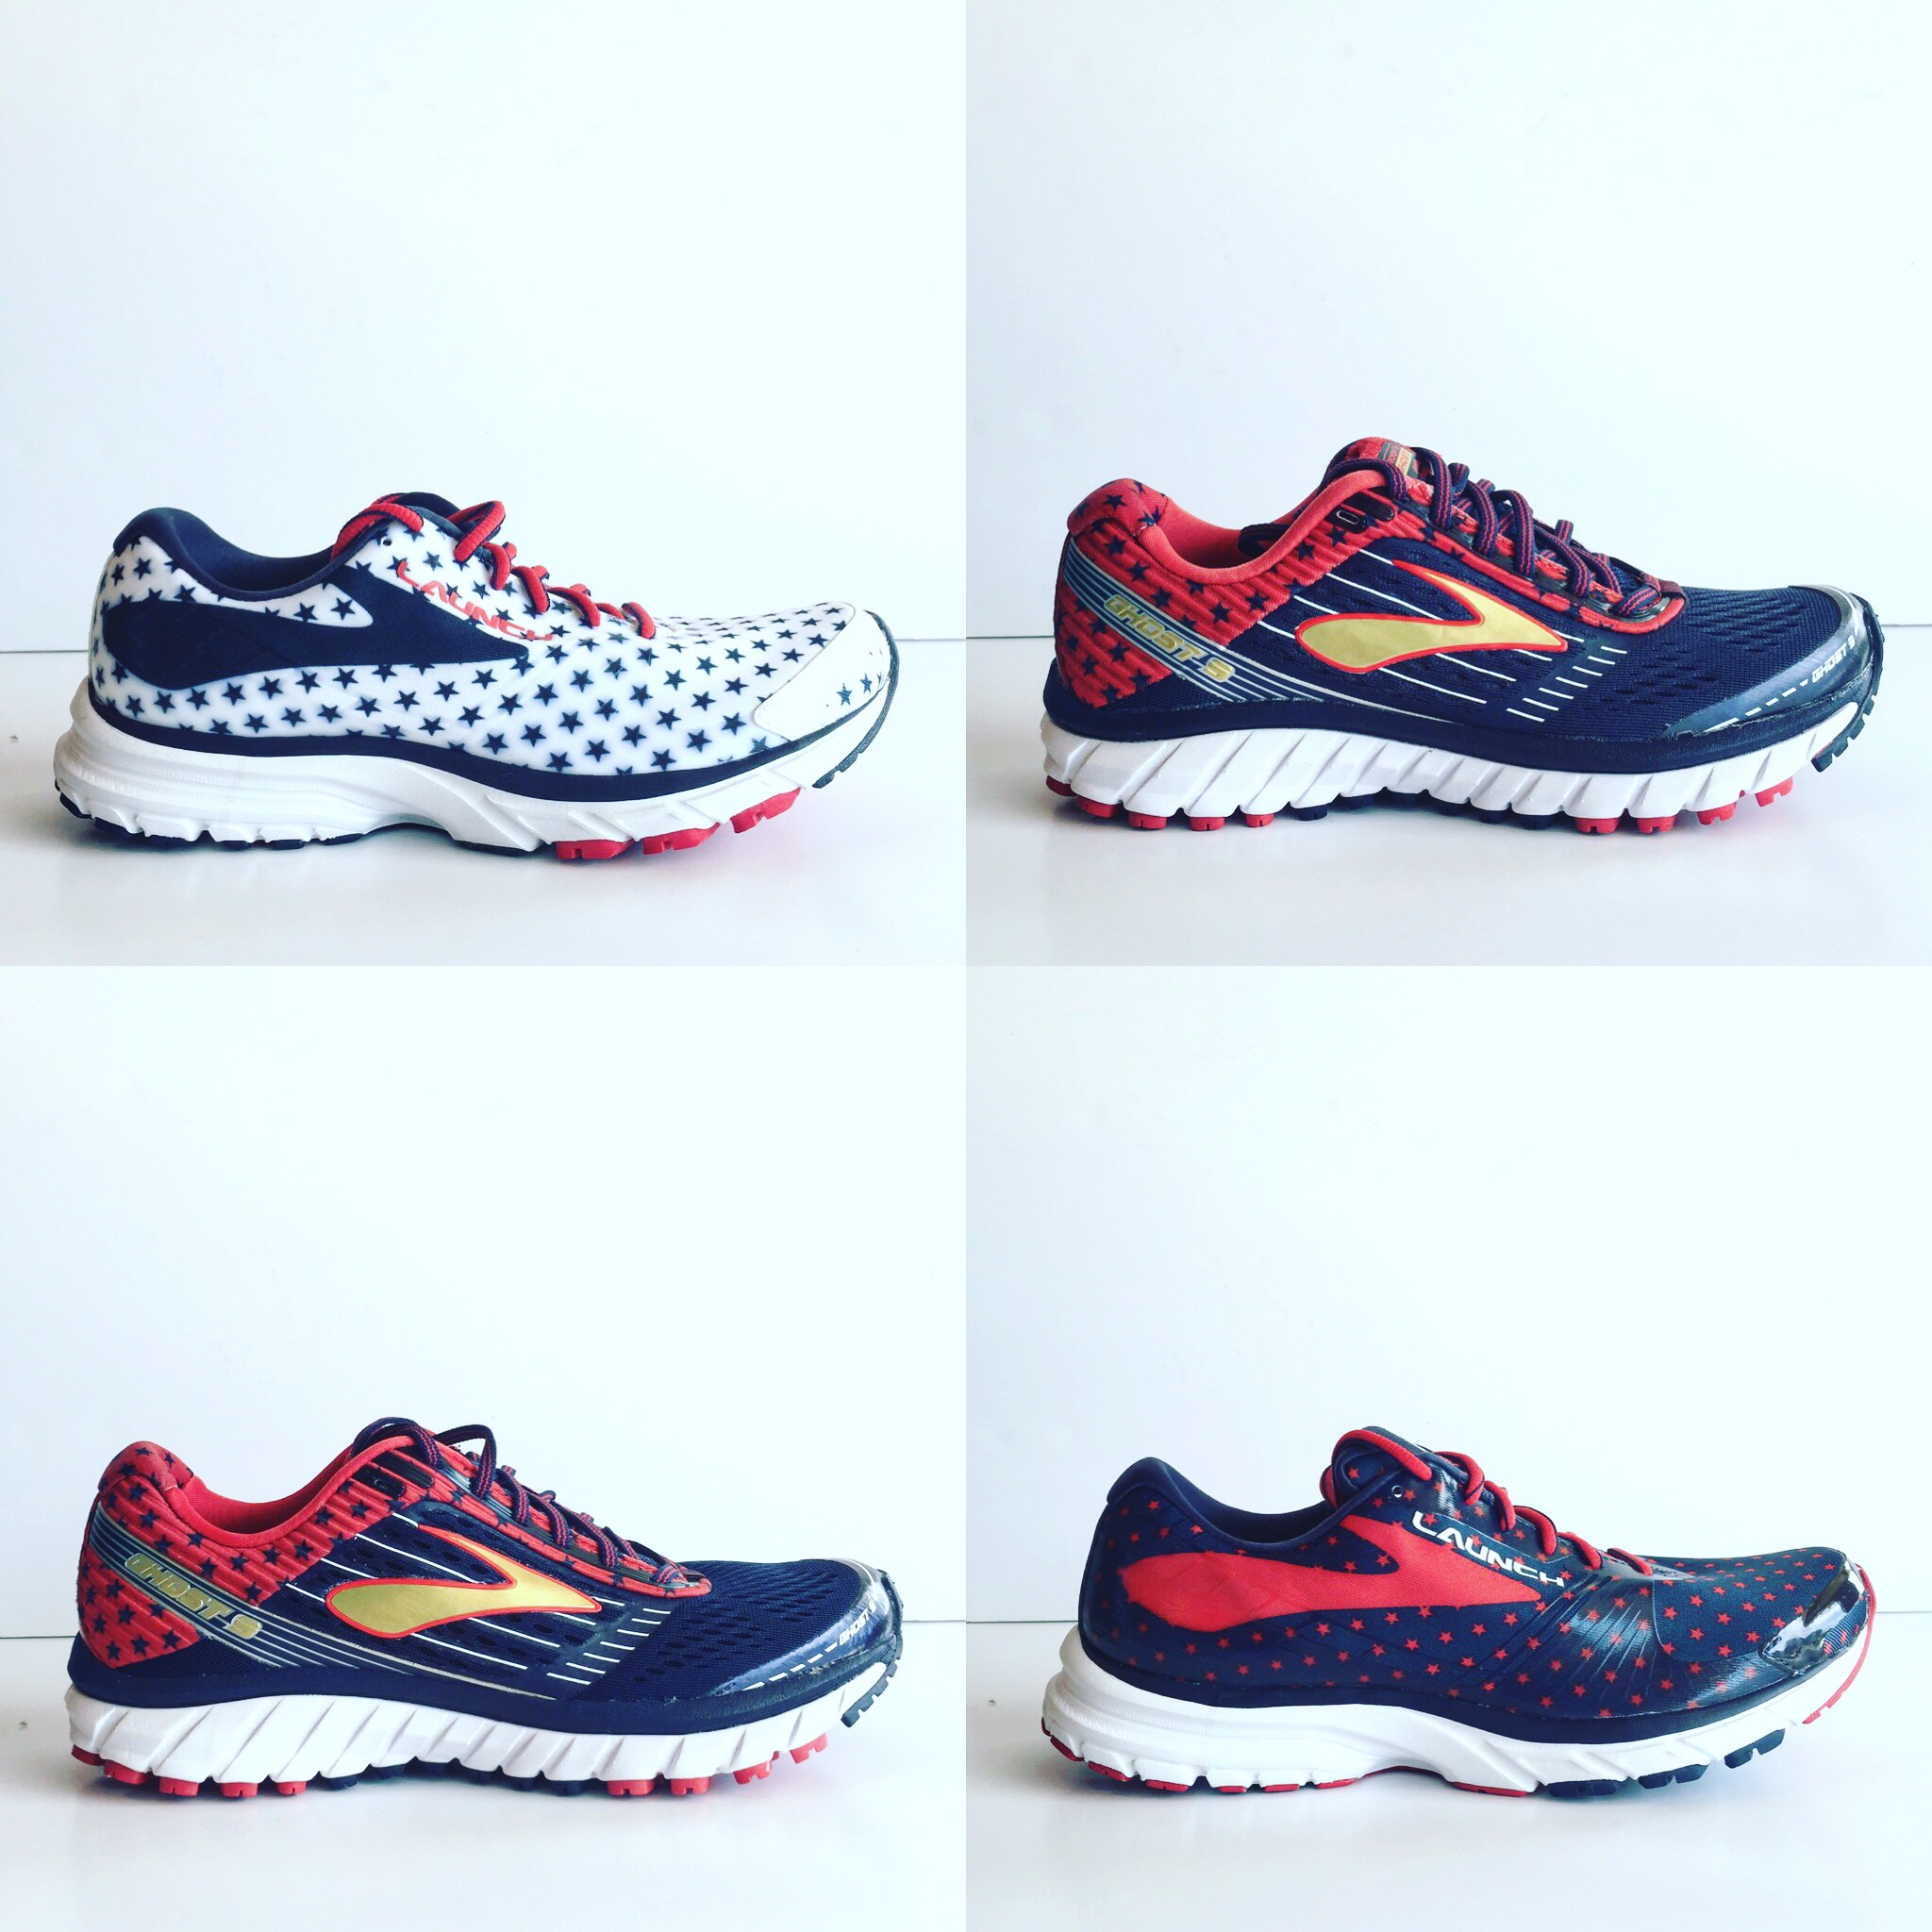 red white and blue brooks running shoes